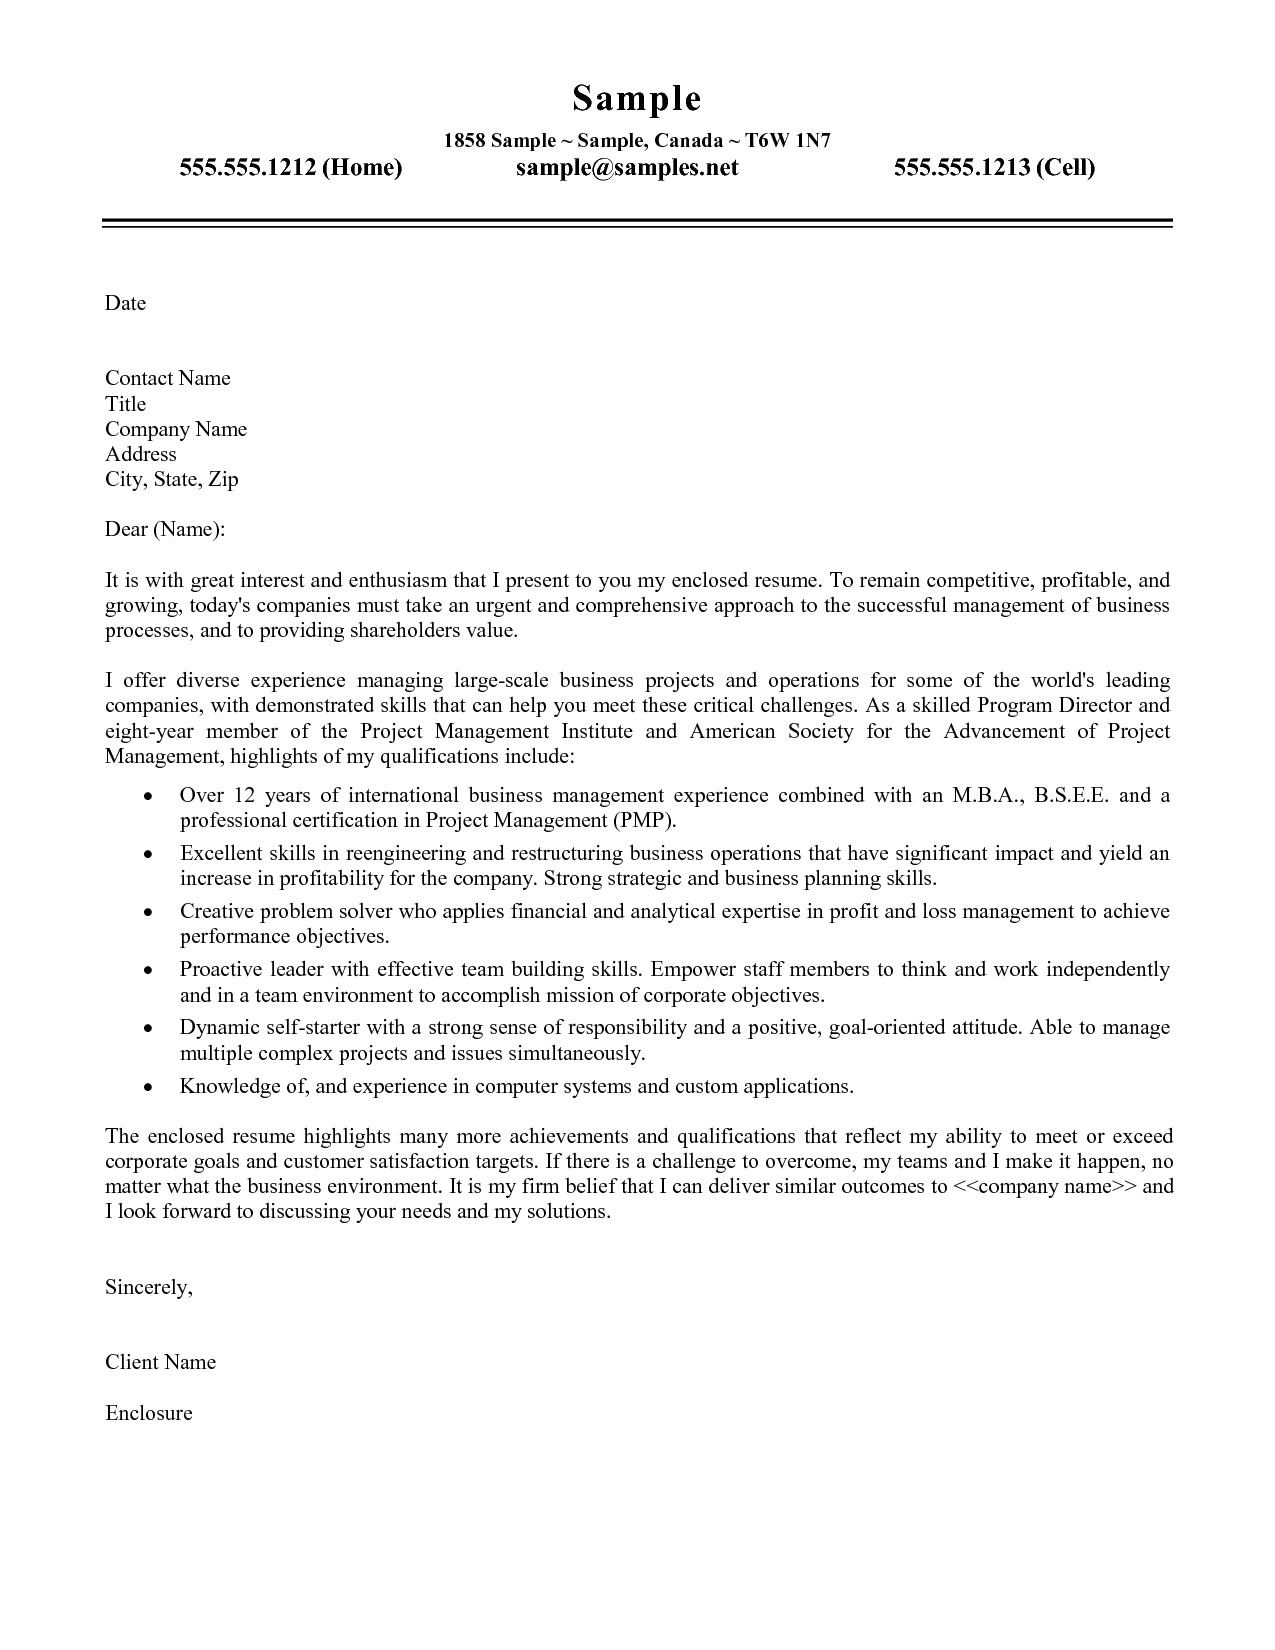 microsoft word cover letter template 2